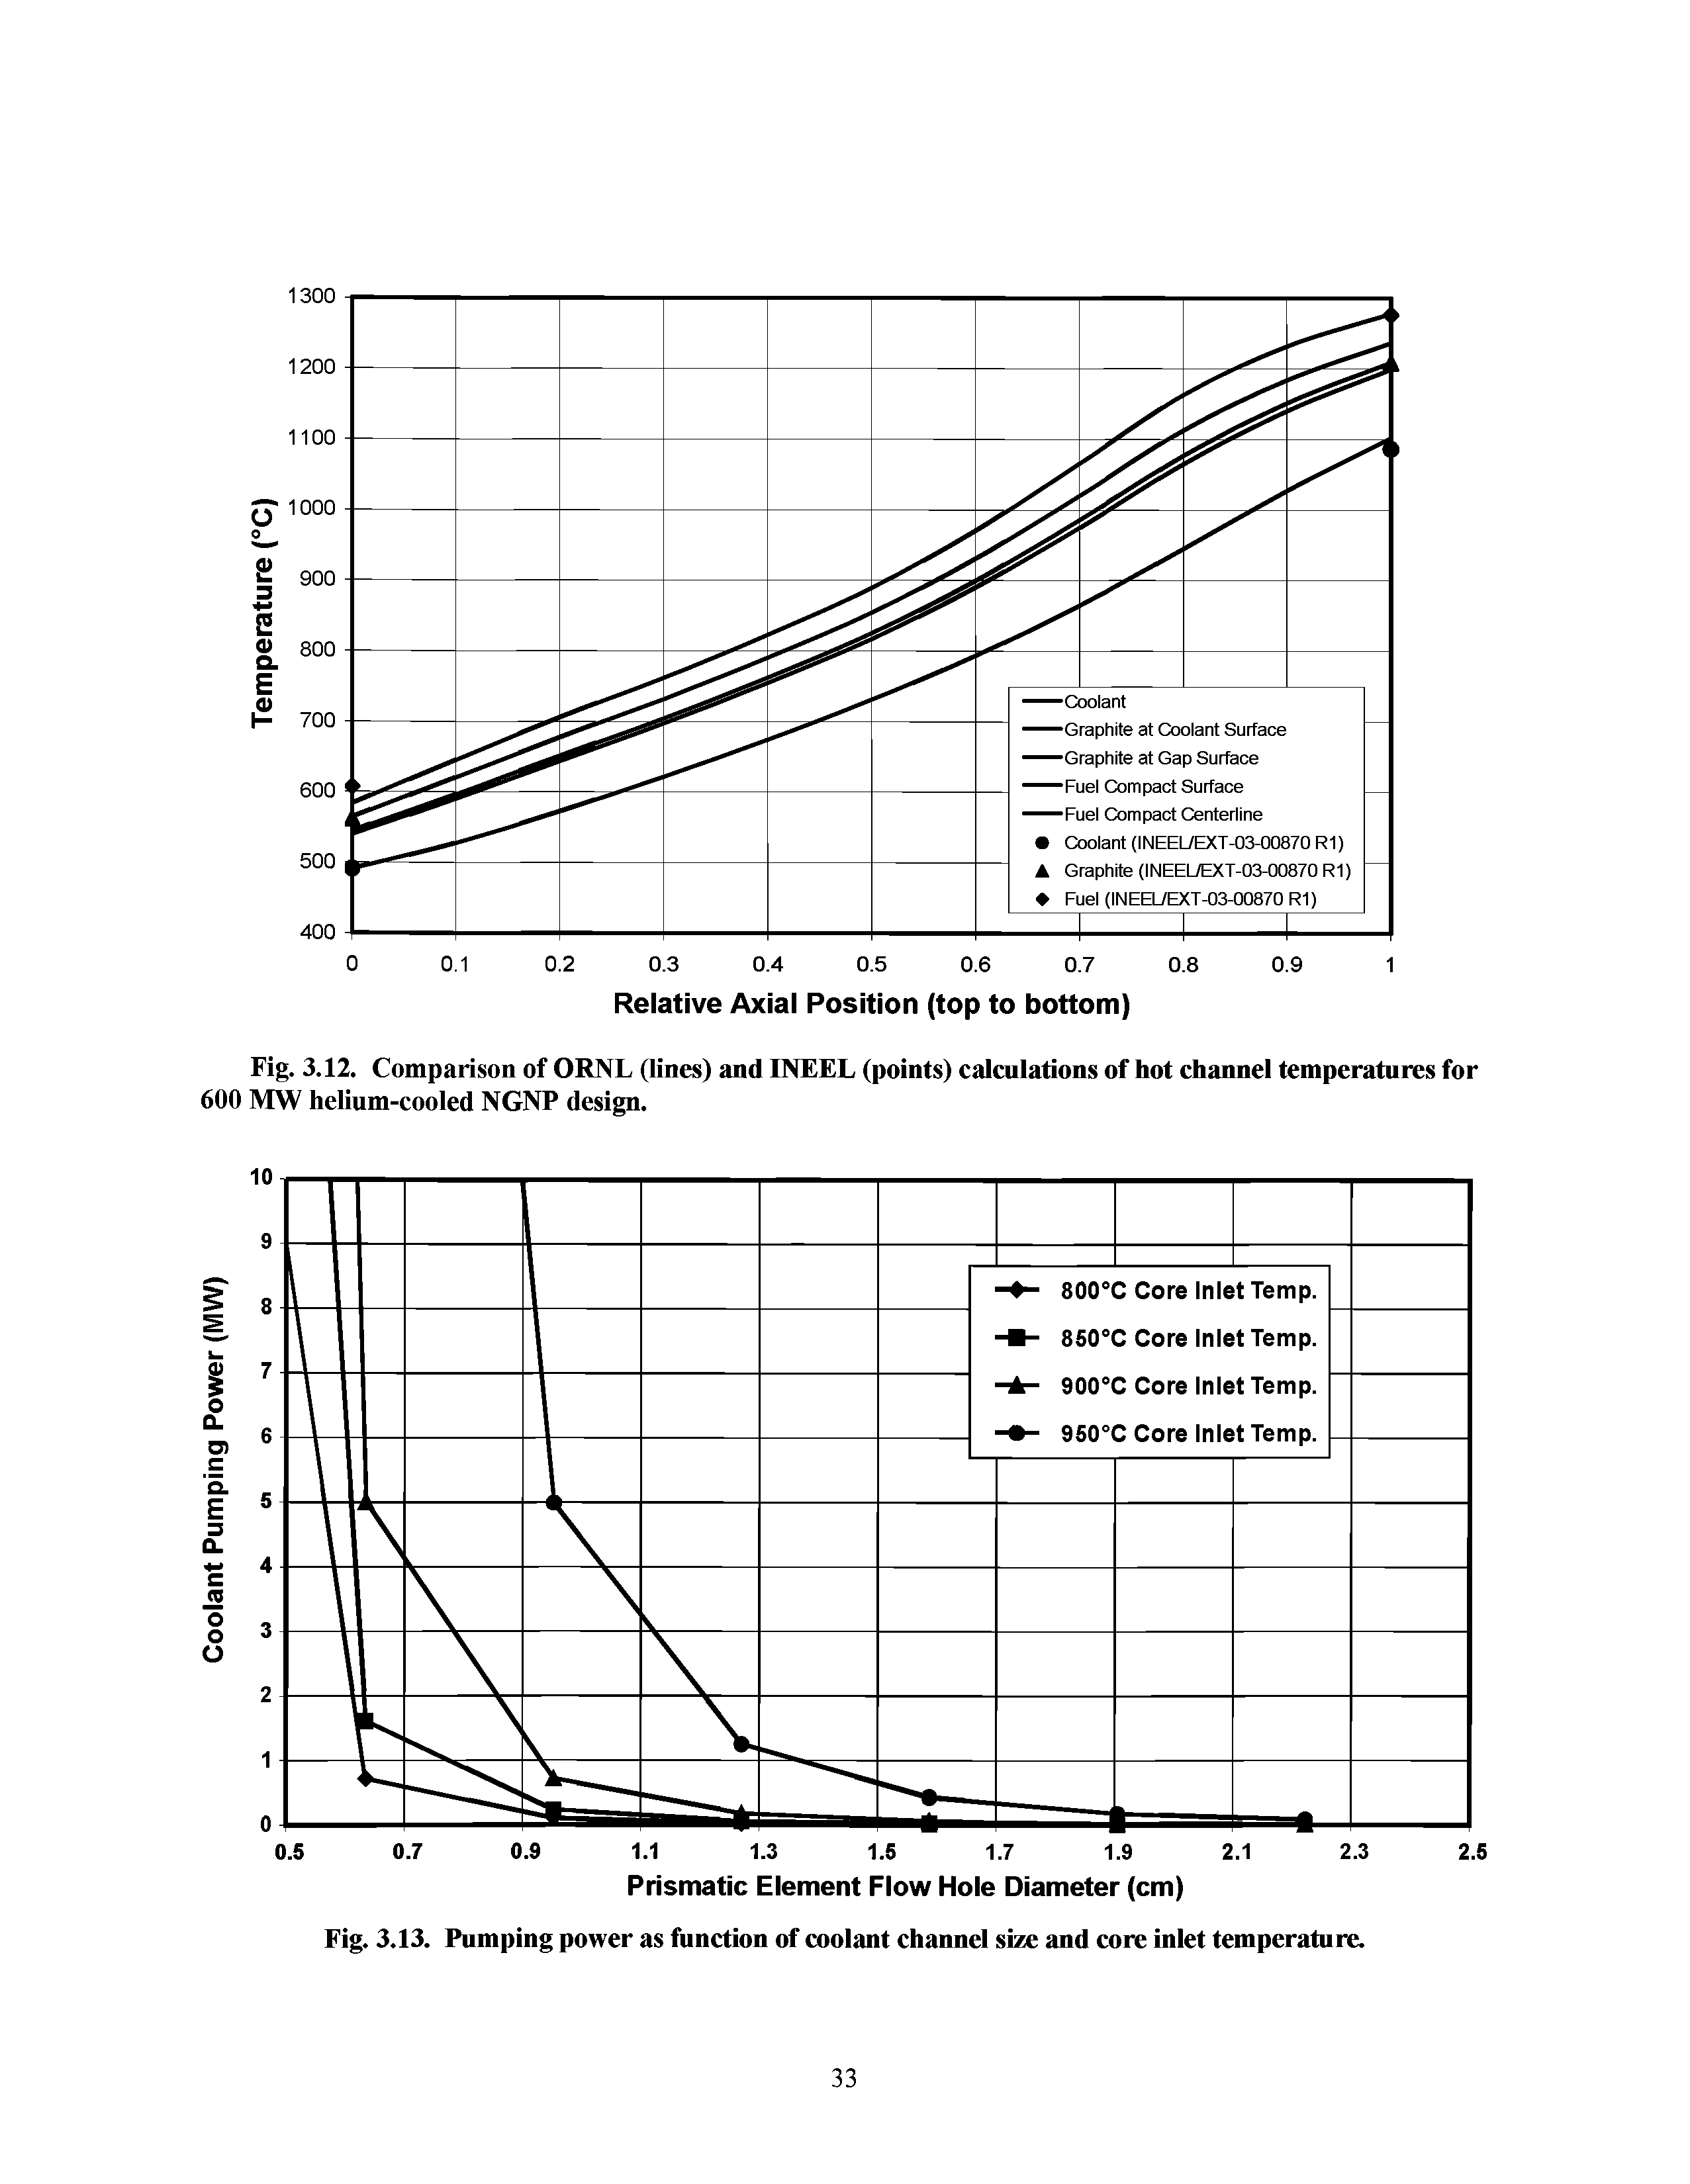 Fig. 3.13. Pumping power as function of coolant channel size and core inlet temperature.